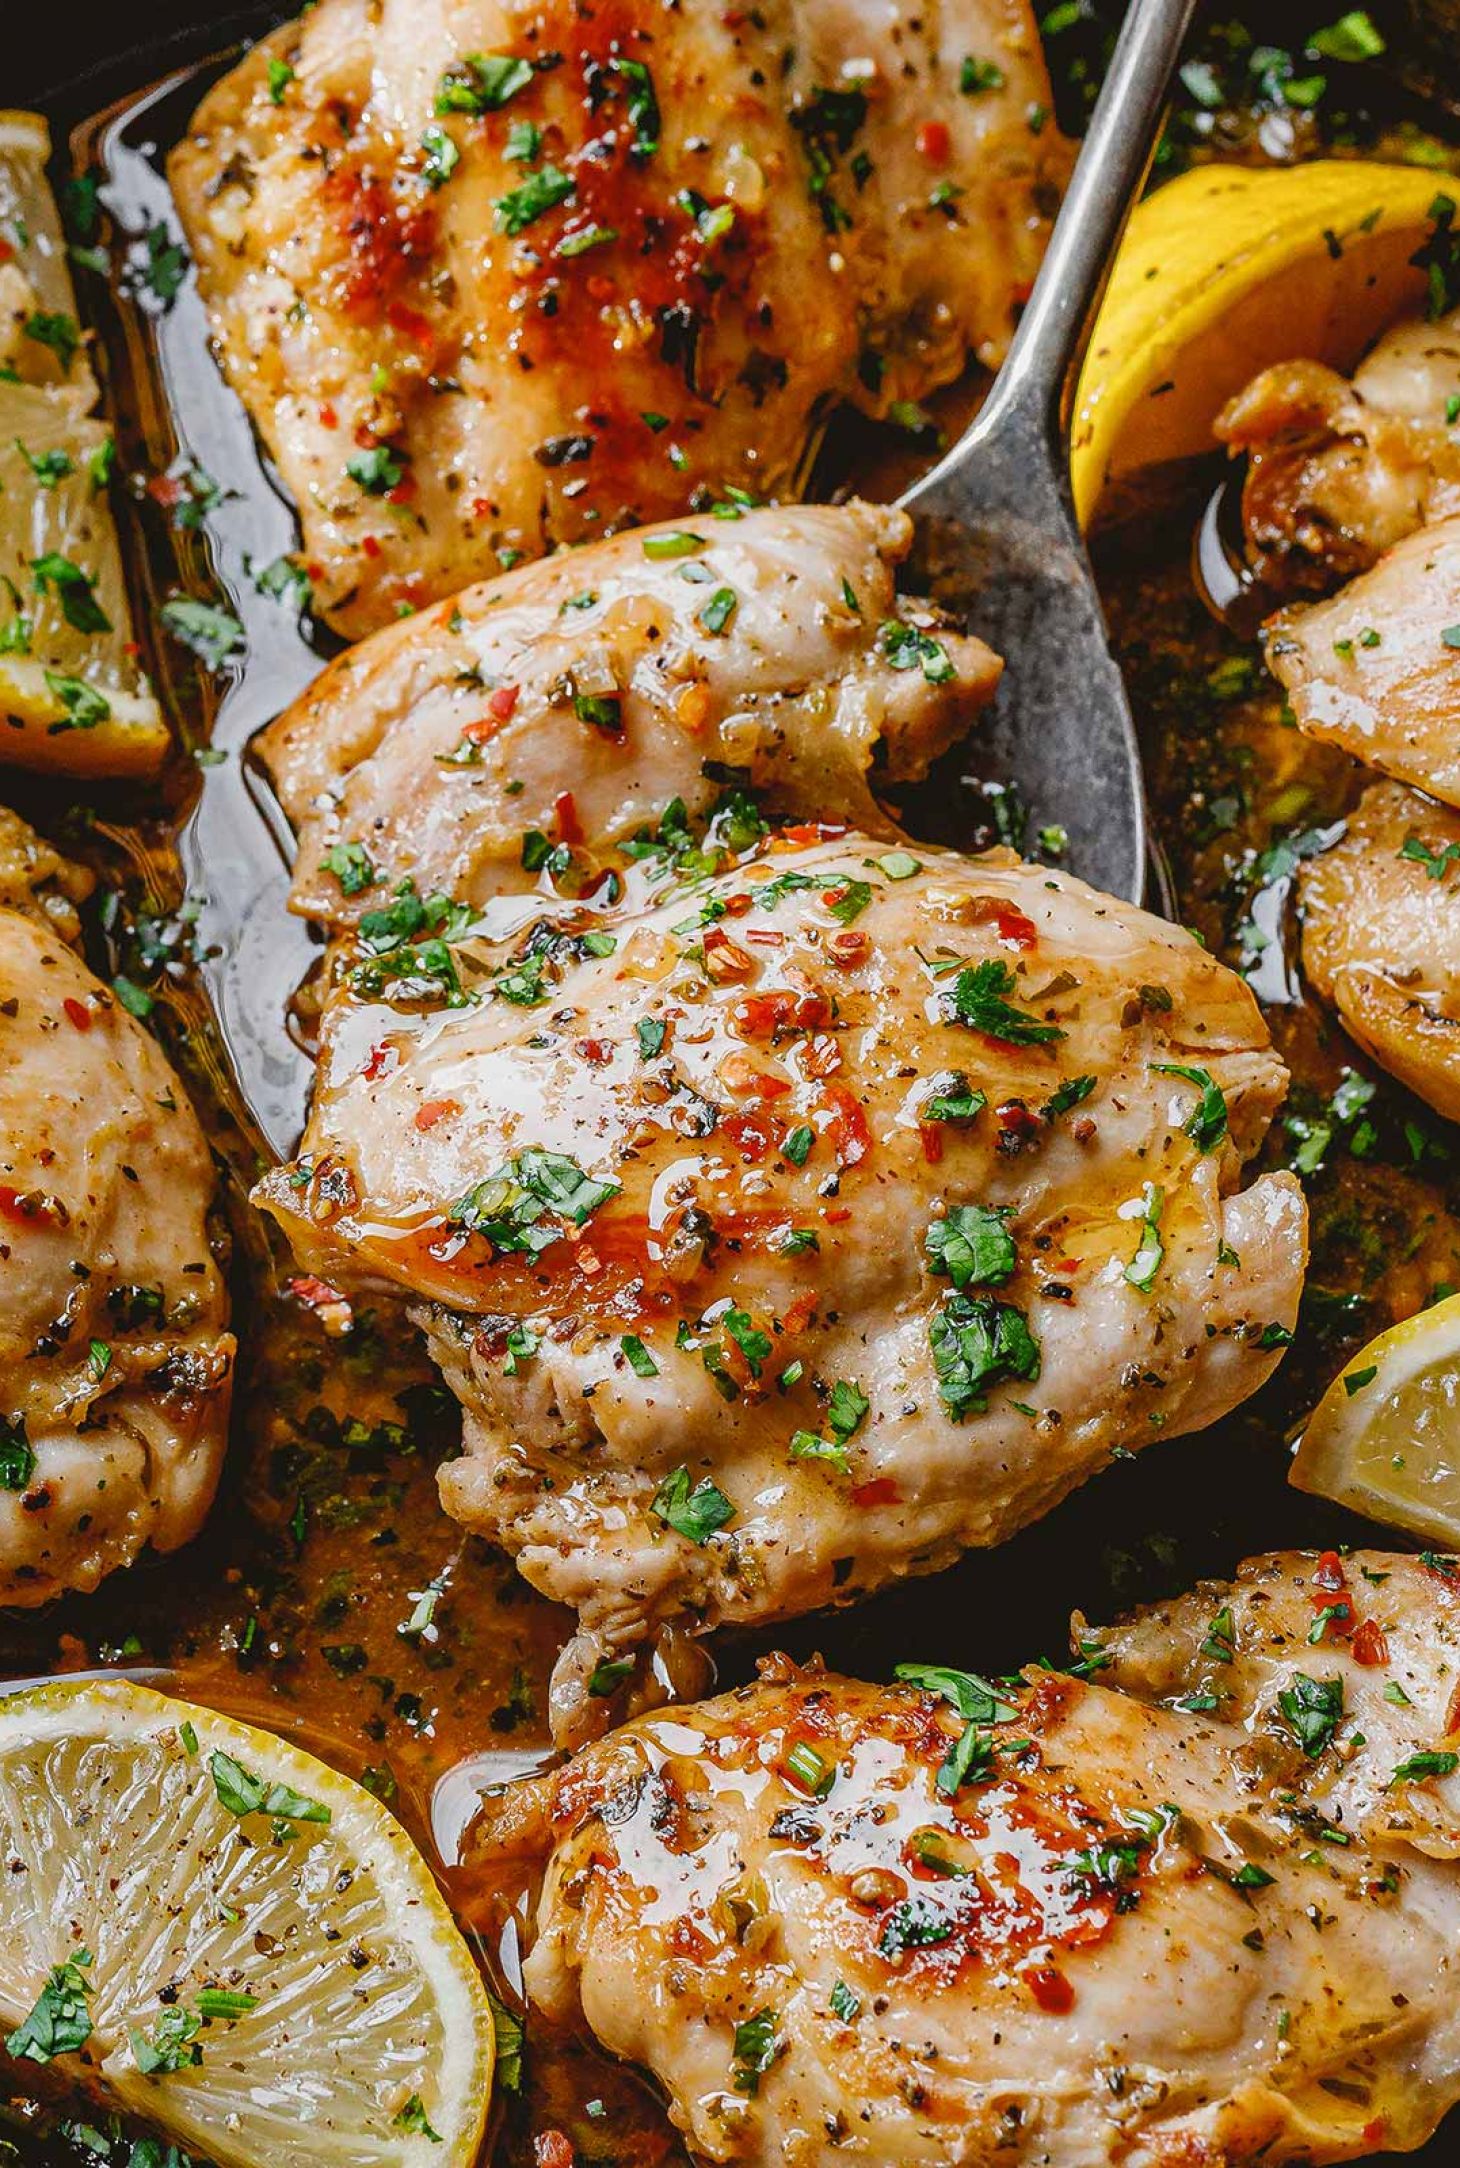 Baked Chicken Recipes: 20 Super Simple & Healthy Baked Chicken Recipes ...